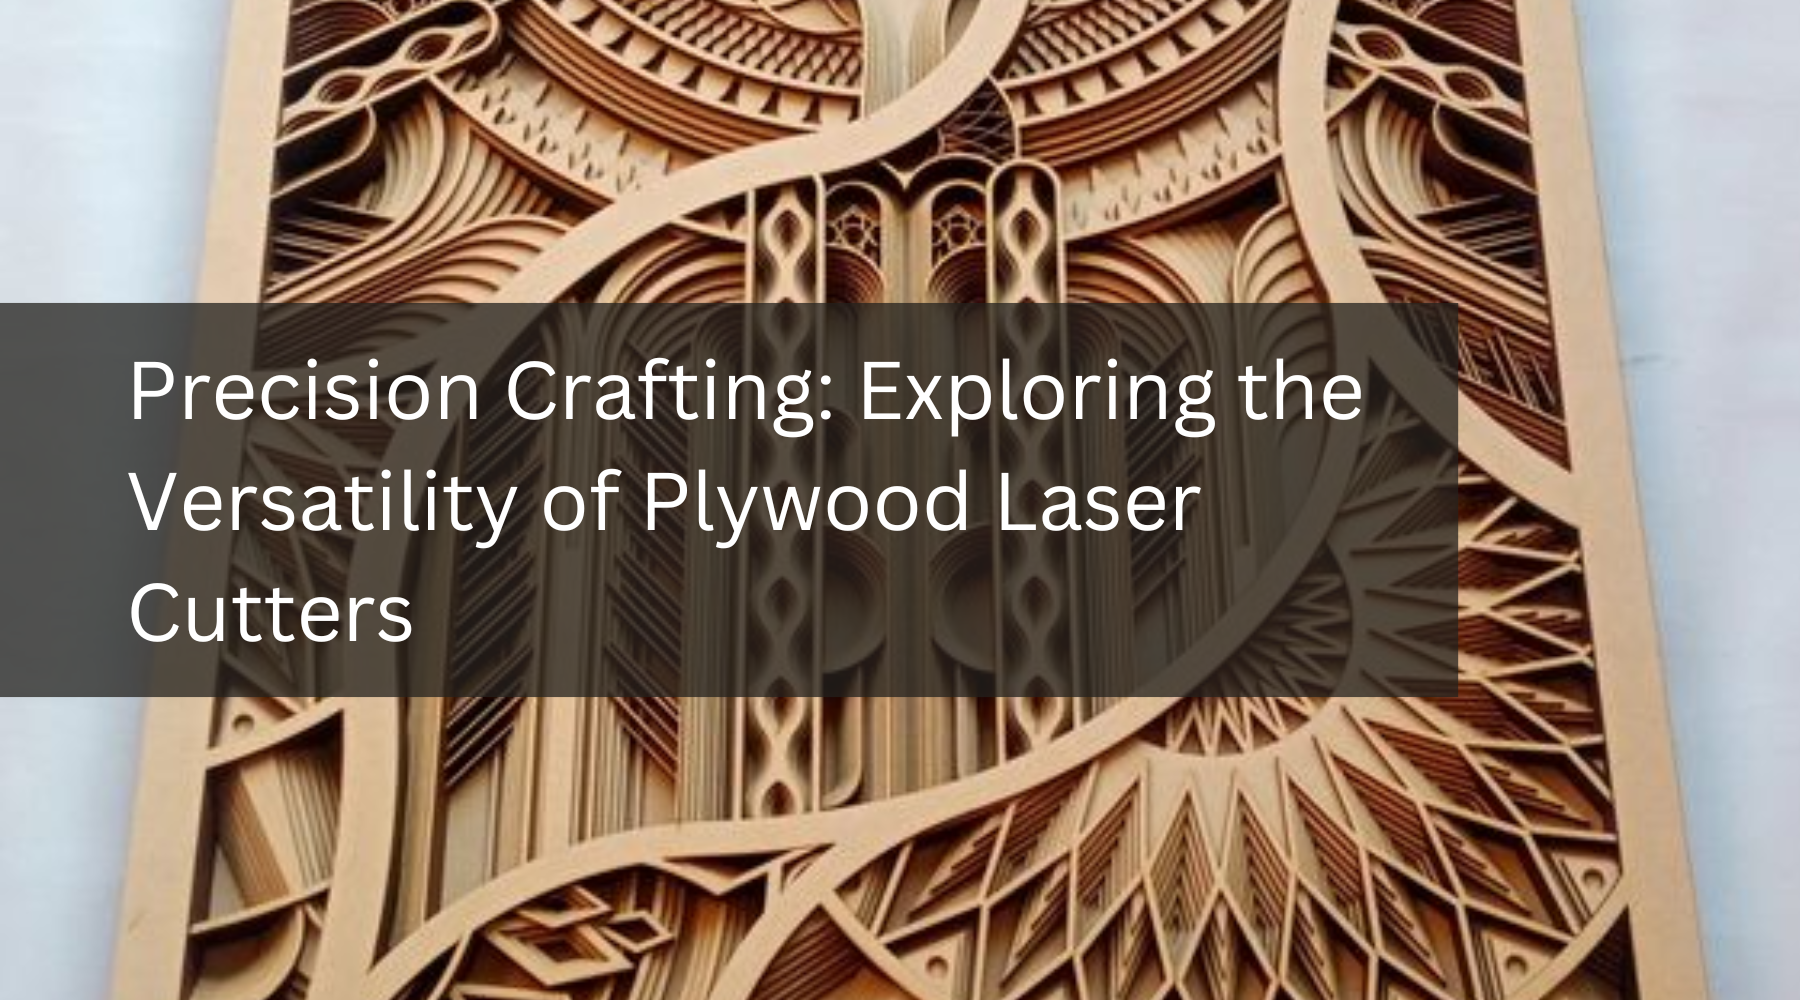 Precision Crafting: Exploring the Versatility of Plywood Laser Cutters